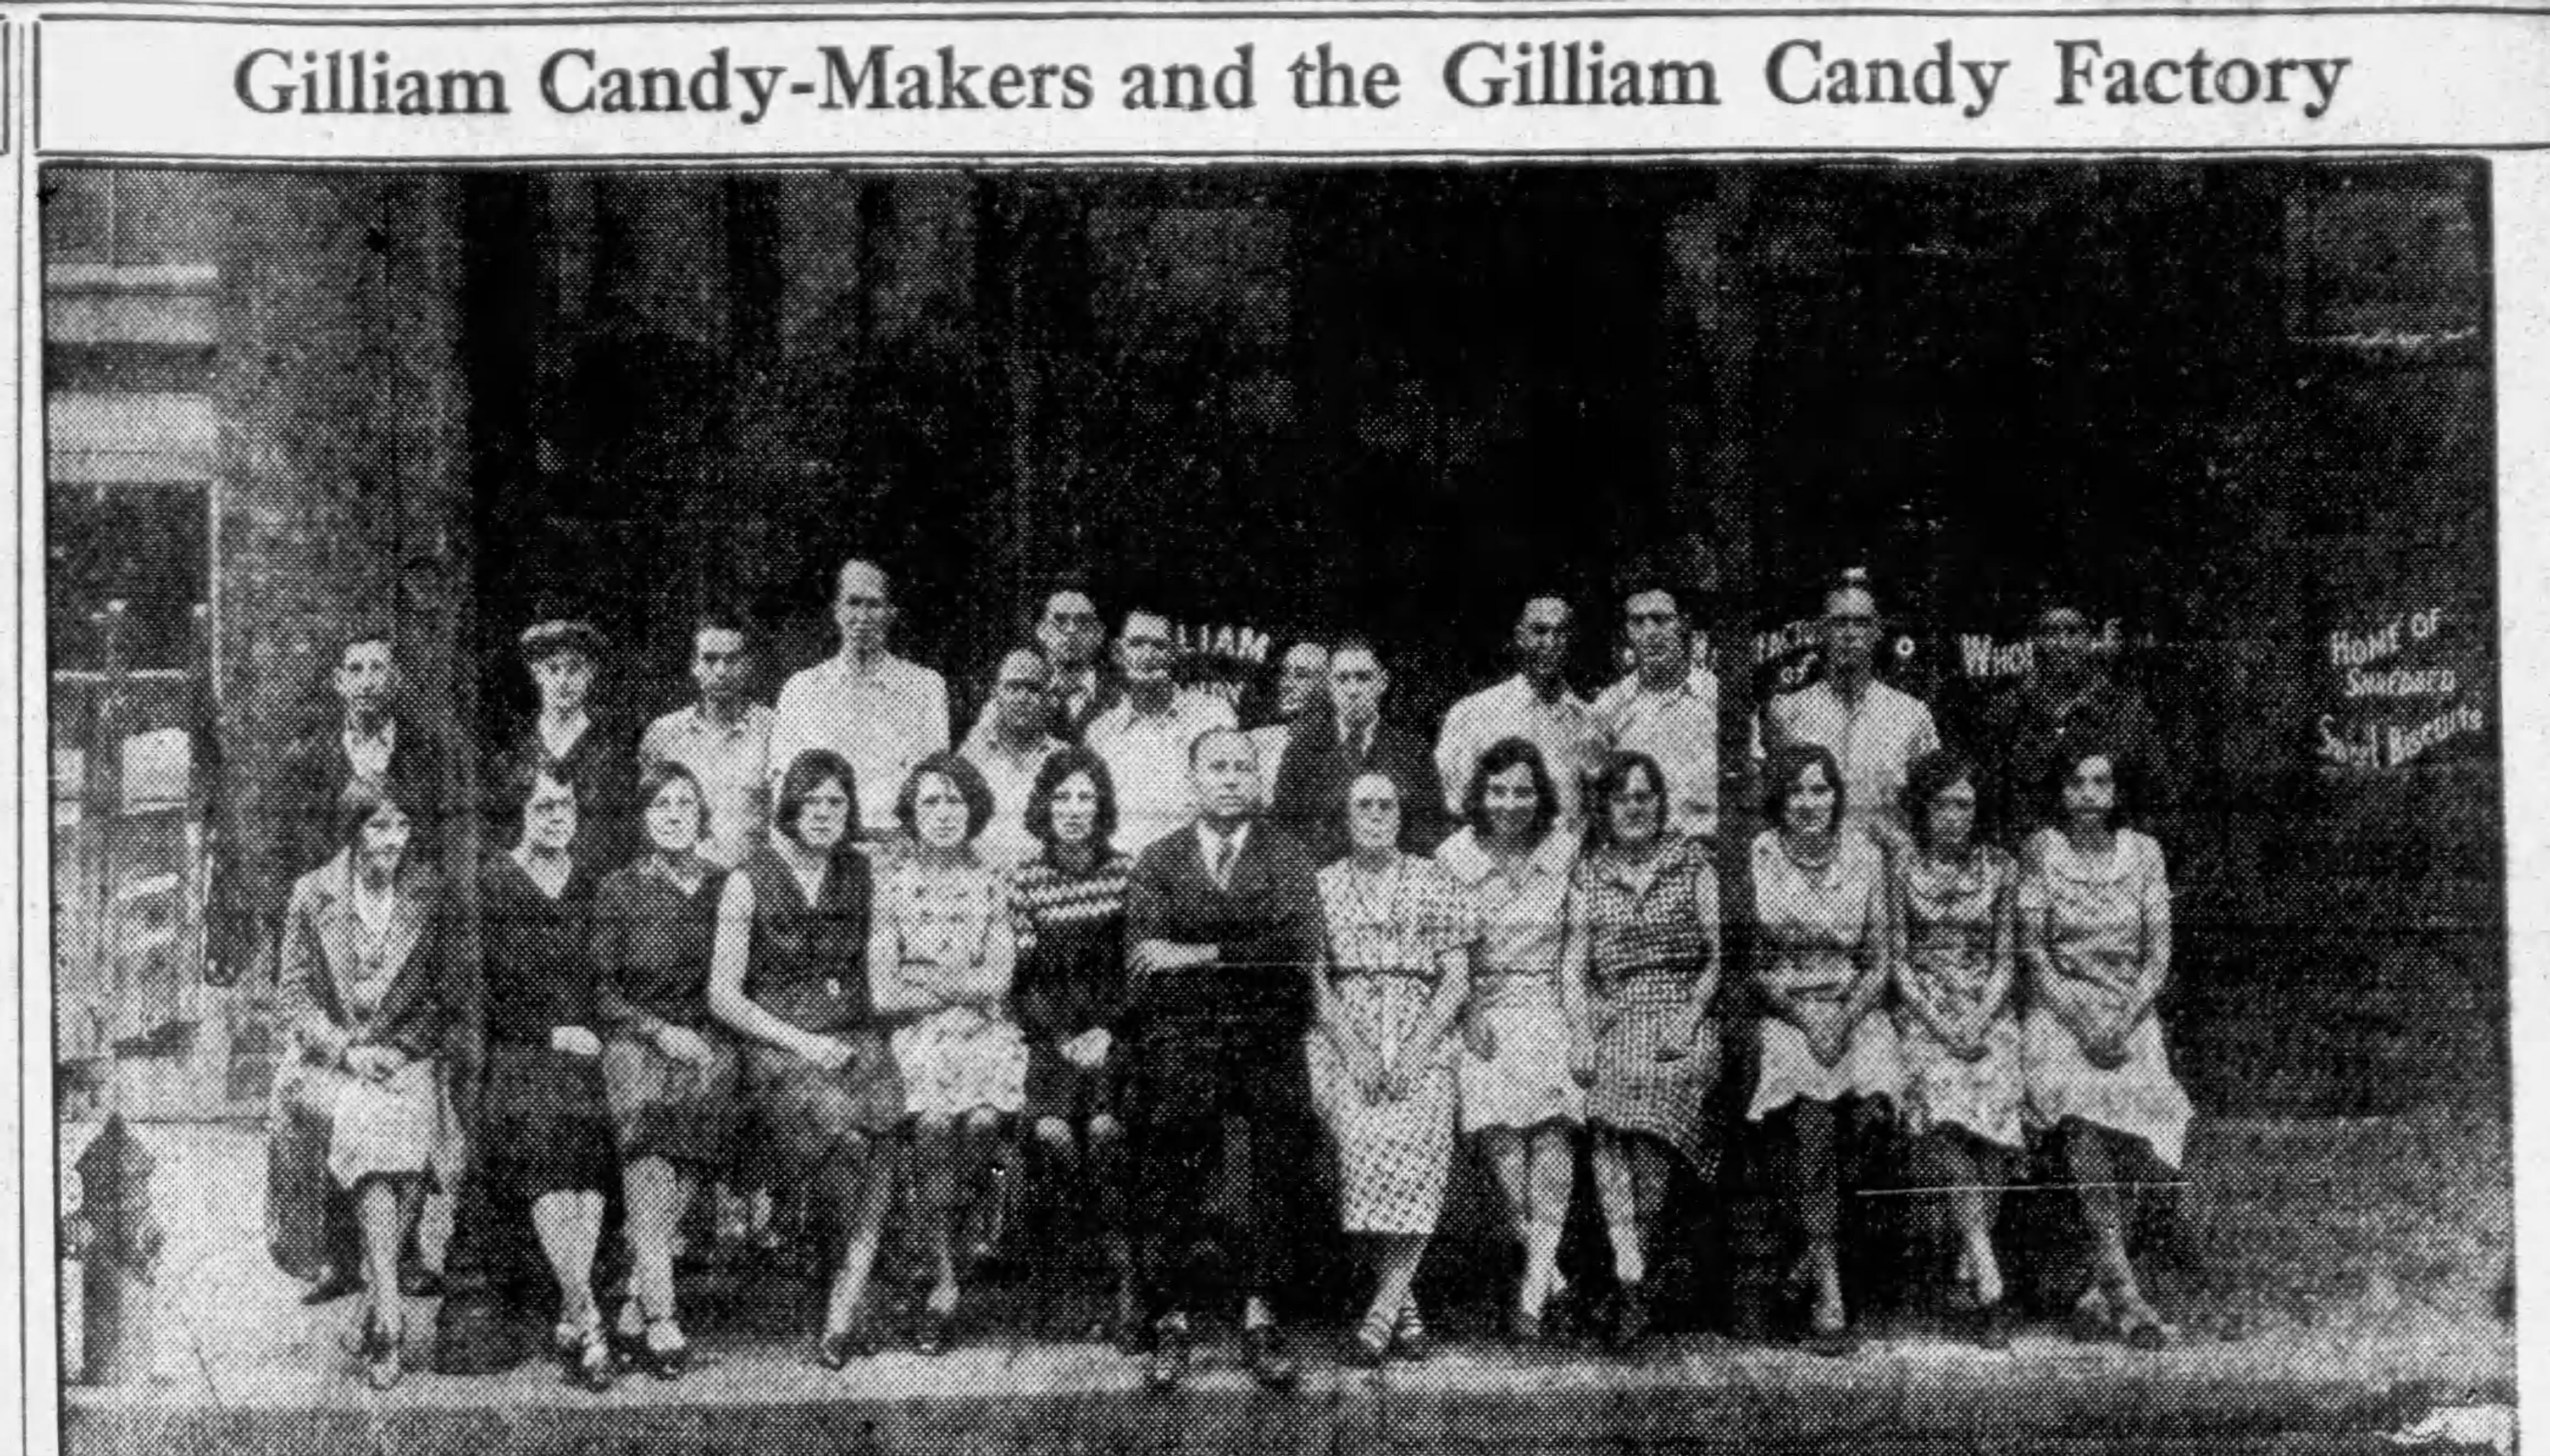 Photograph of employees at Gilliam Candy from the March 16, 1931, Paducah Sun.